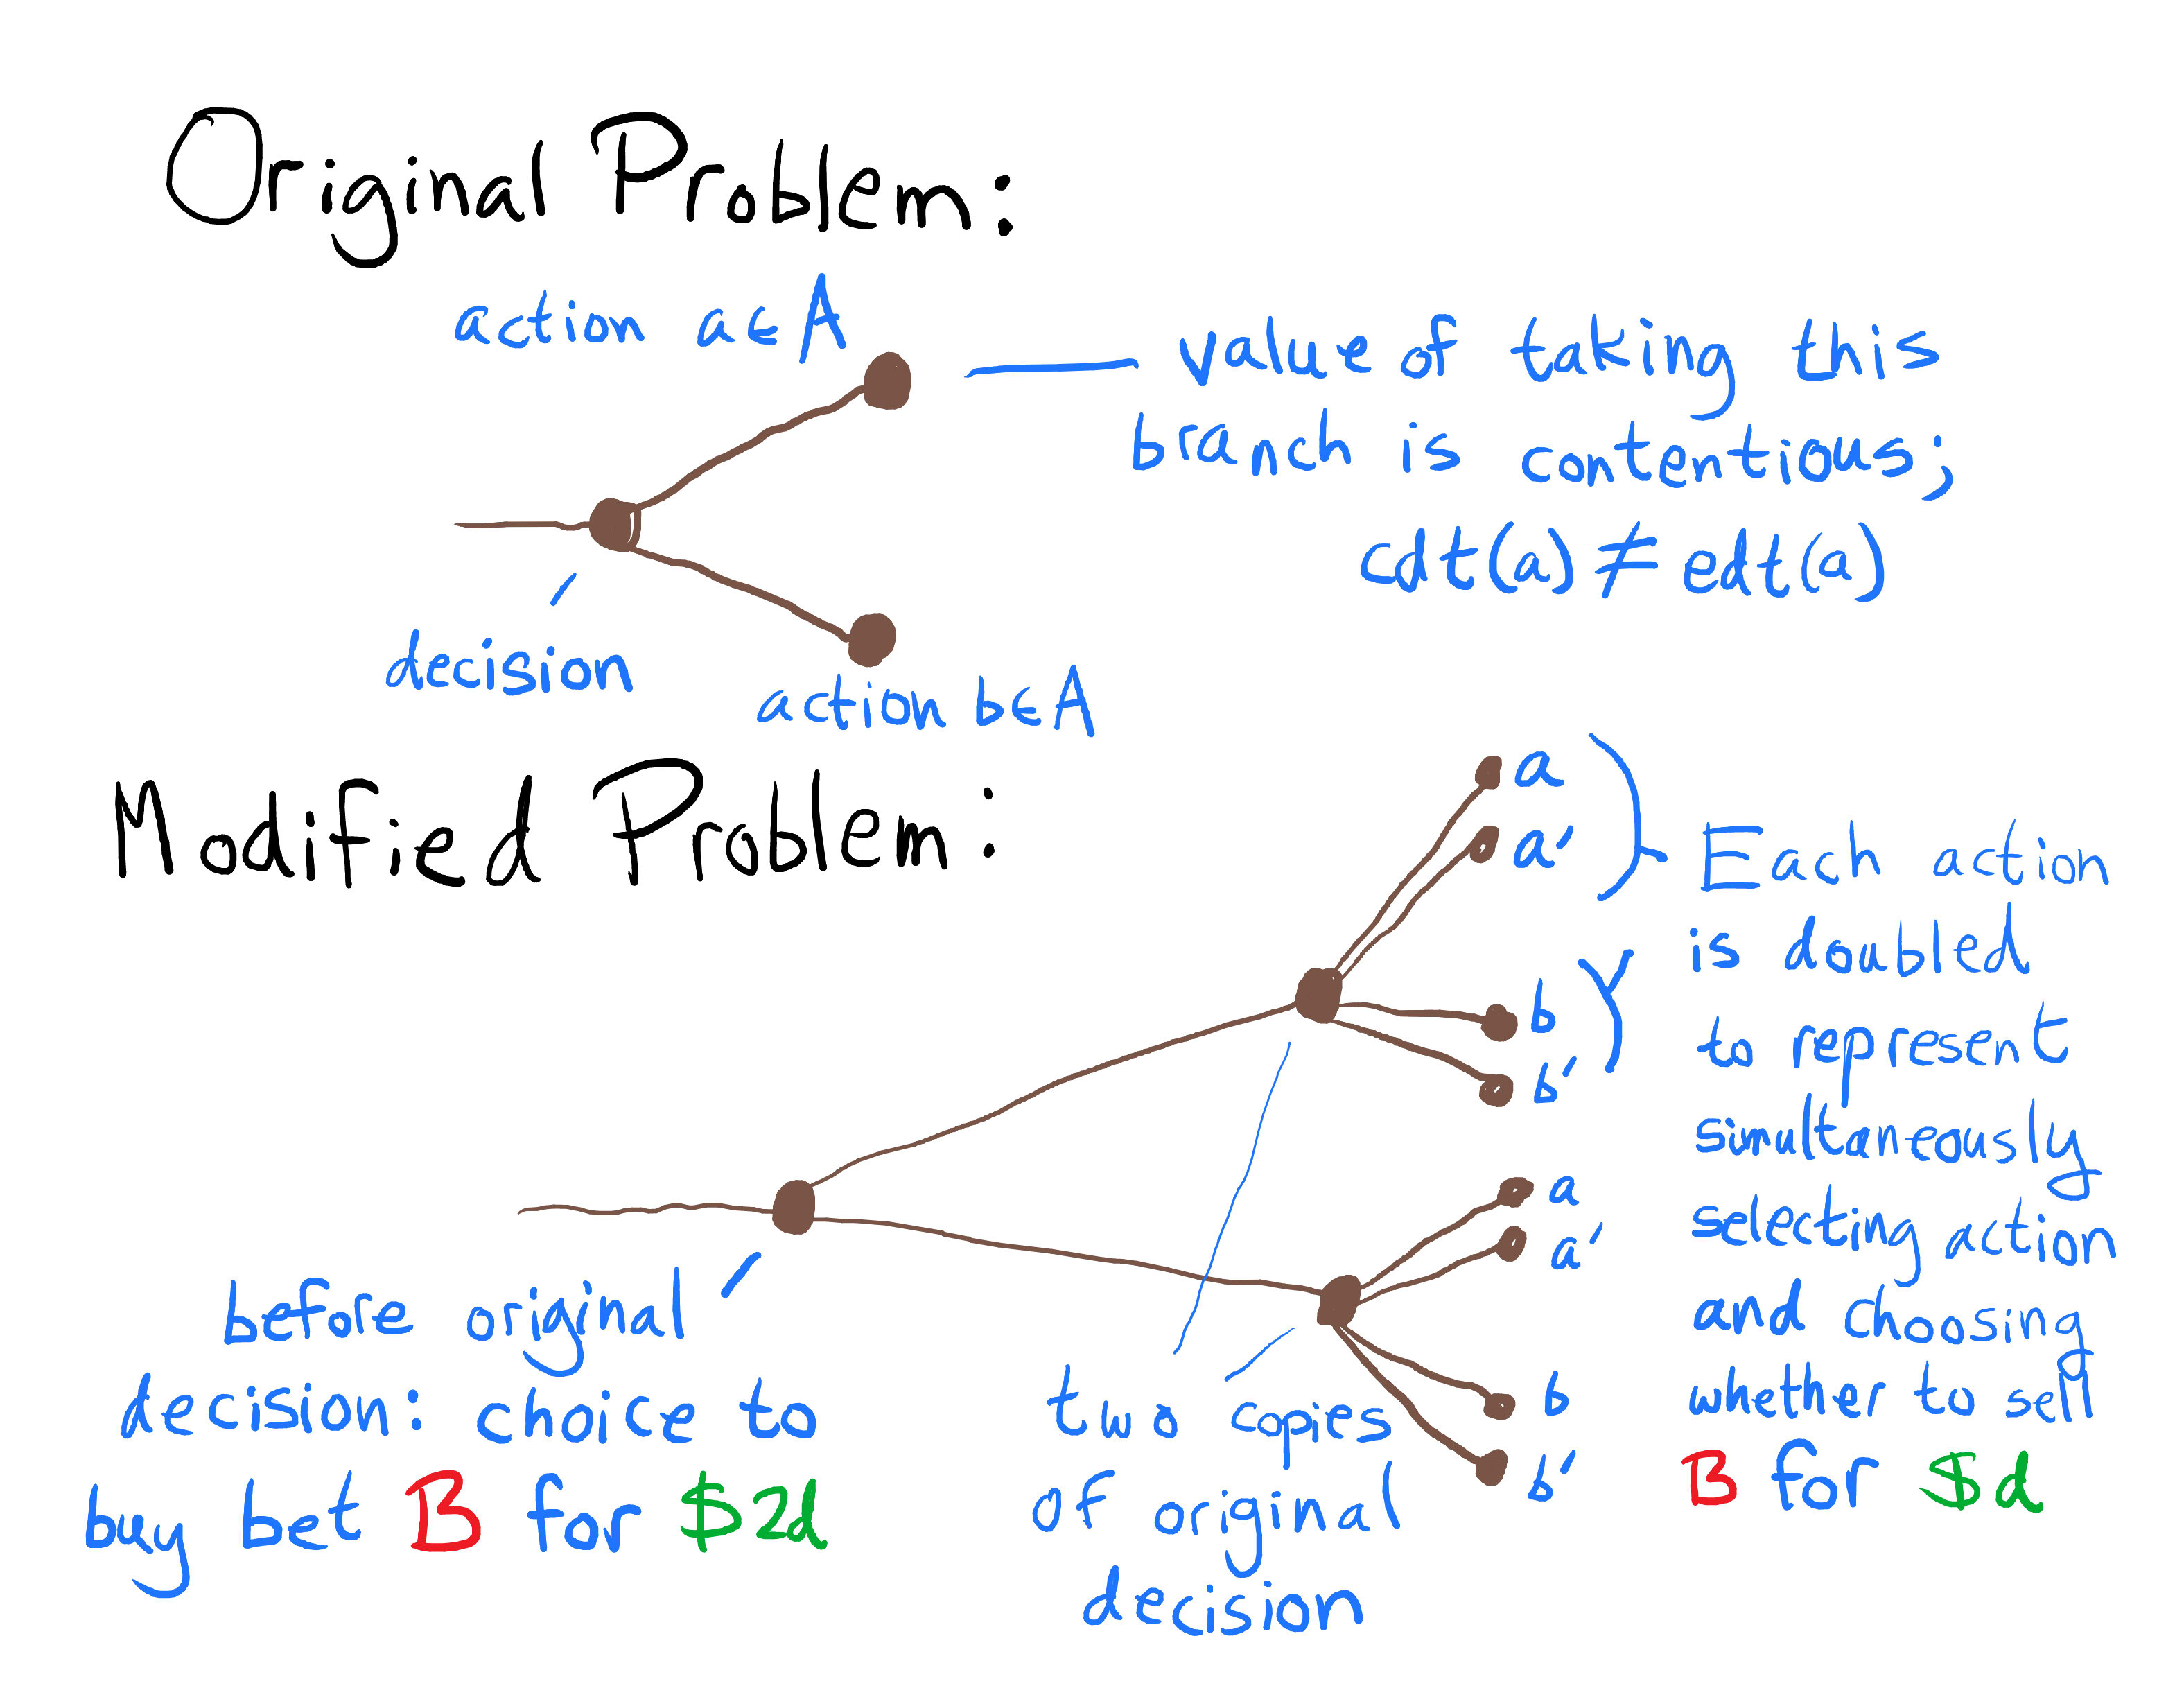 Illustration of how the decision problem is modified.